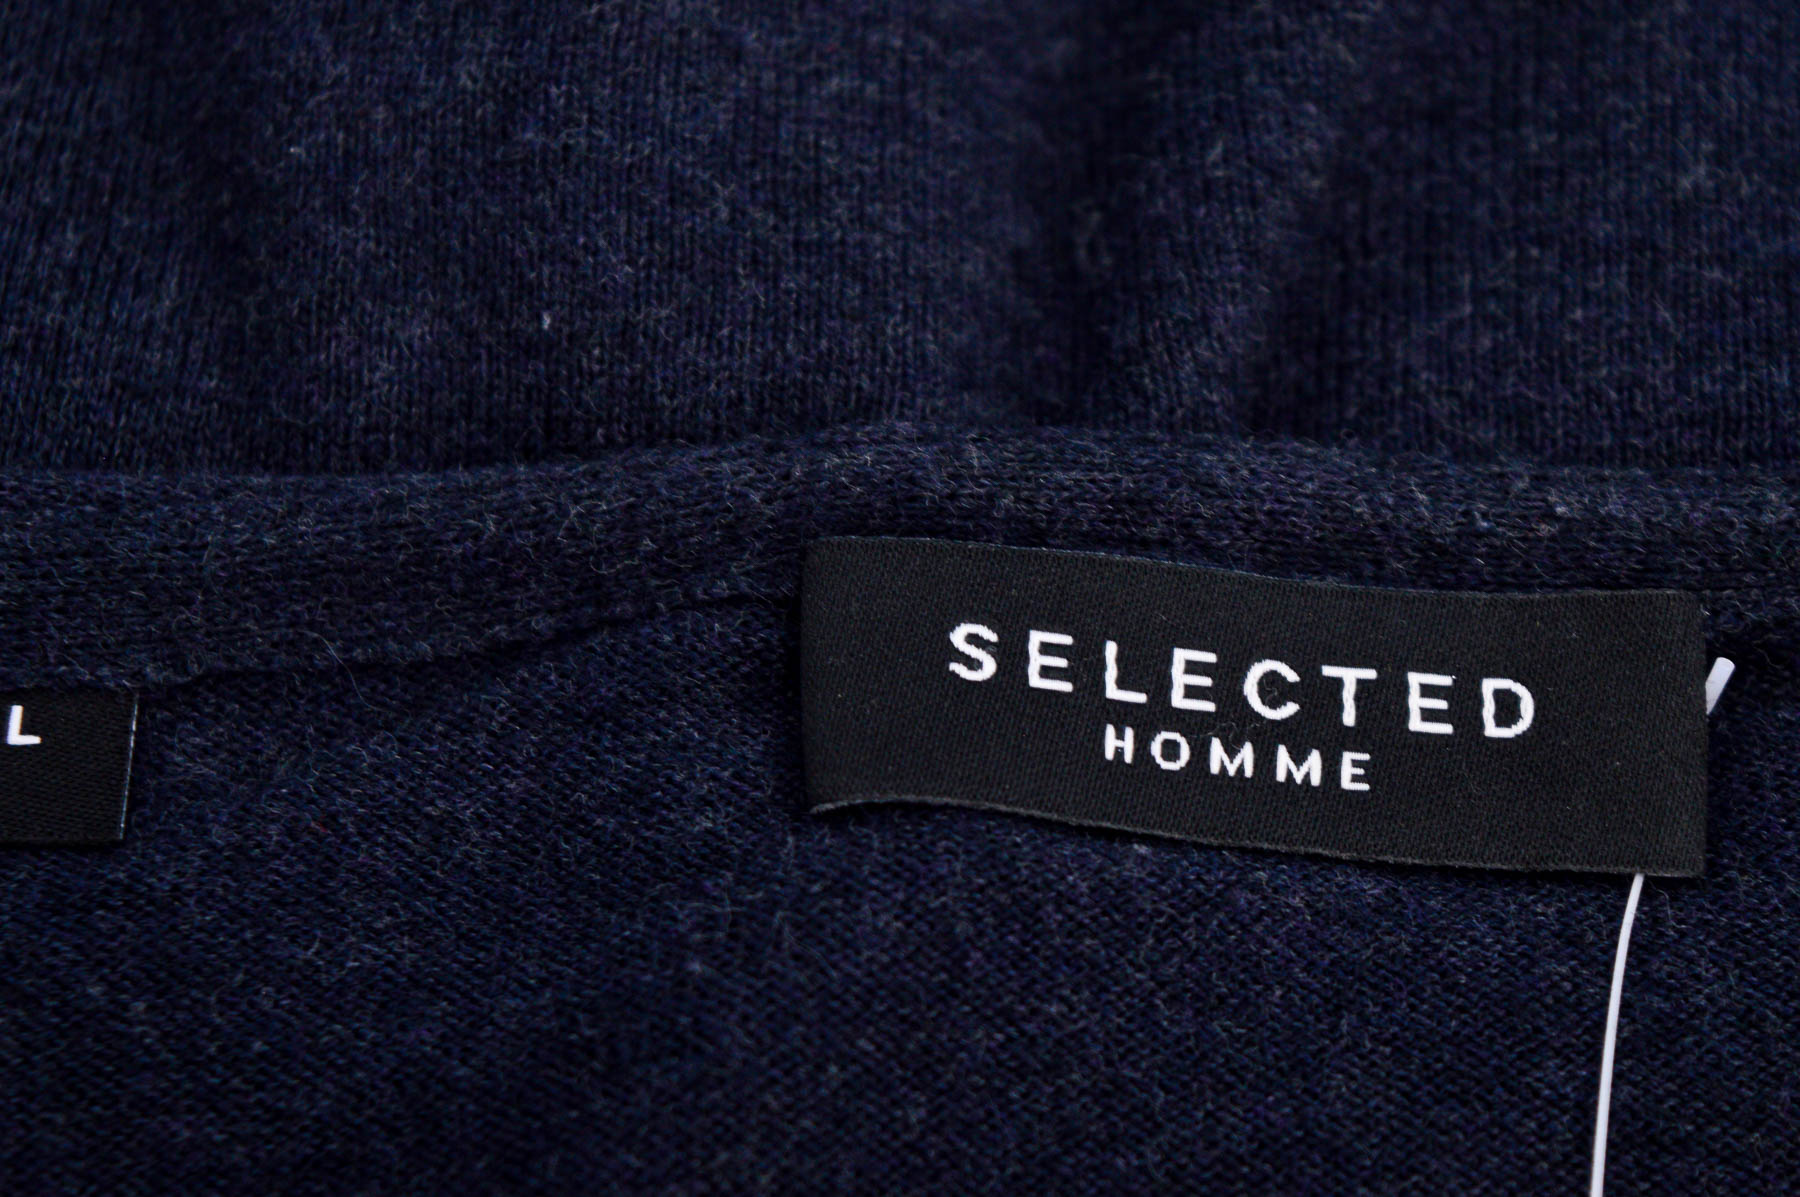 Men's sweater - SELECTED HOMME - 2